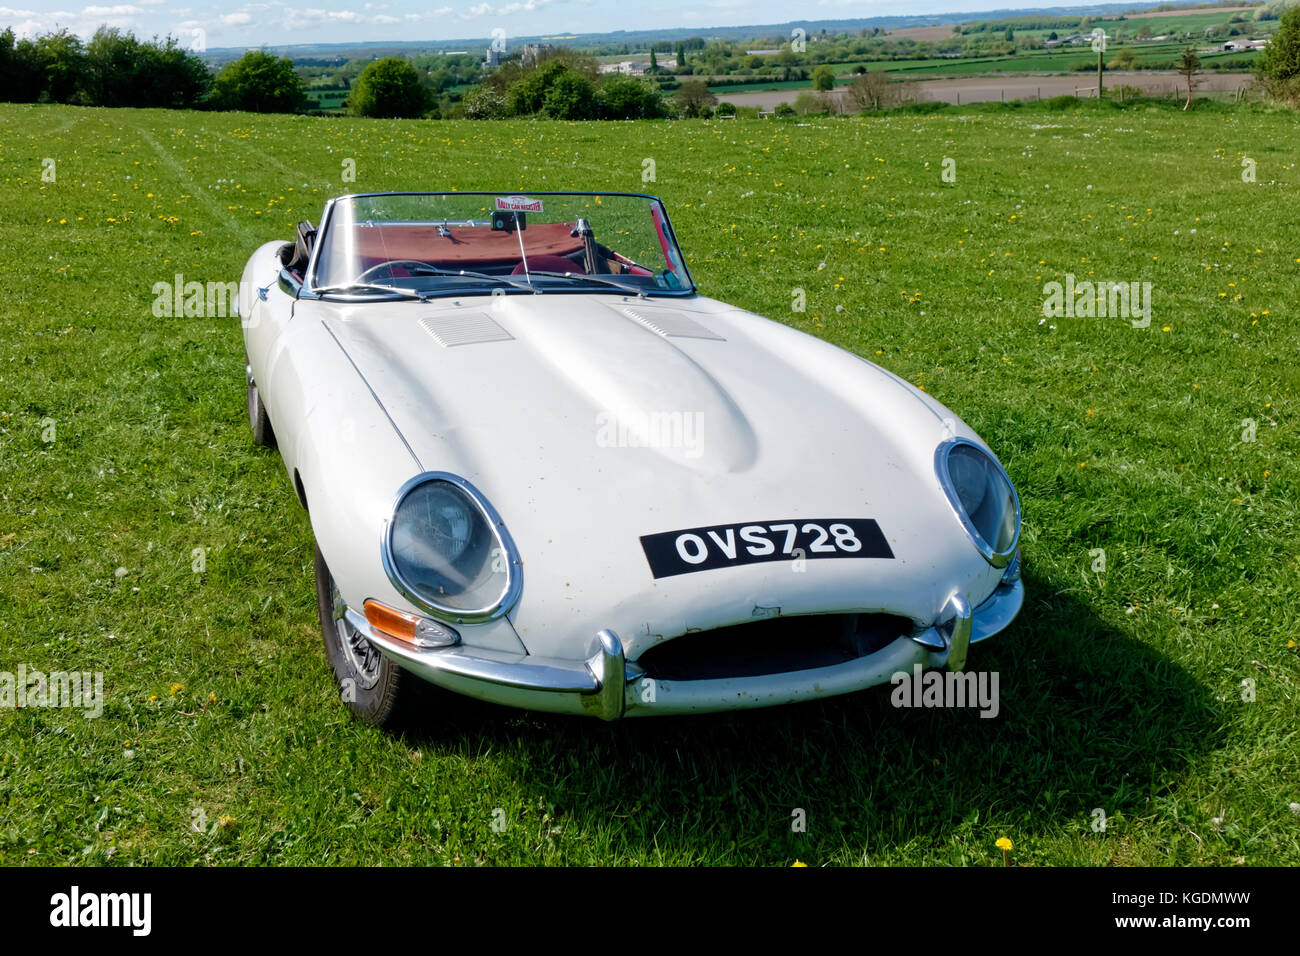 A classic Jaguar E Type motor car Westbury at the 2017 Transport and Vintage Gathering, Bratton, Wiltshire, United Kingdom. Stock Photo